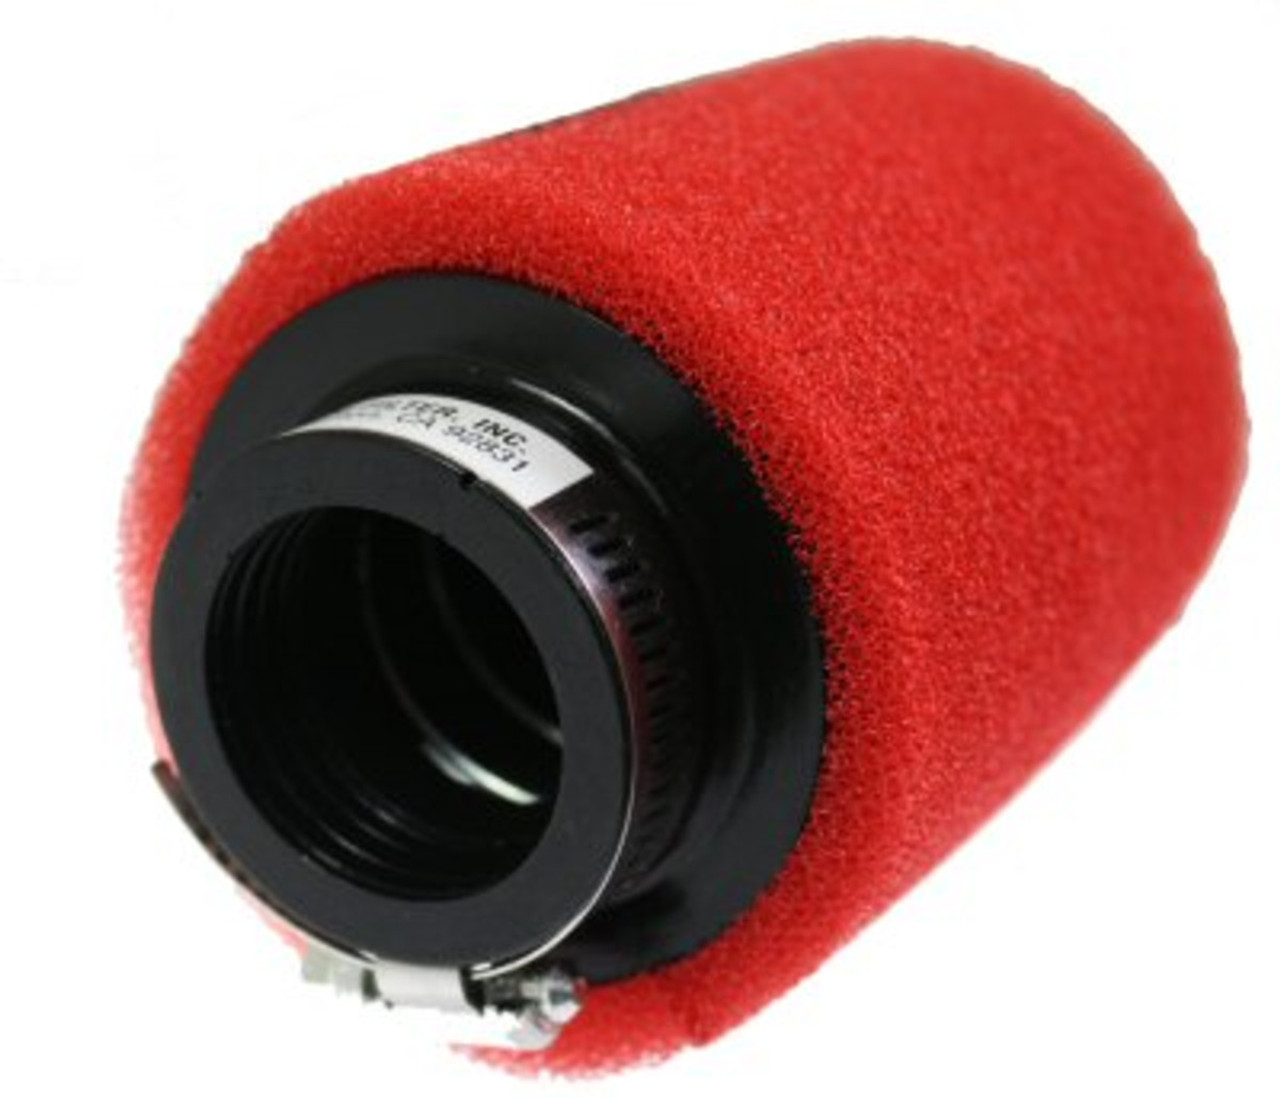 UNI FILTER CLAMP-ON DUAL LAYER POD AIR FILTER 38mm 50cc - 100cc QMB139 SCOOTERS